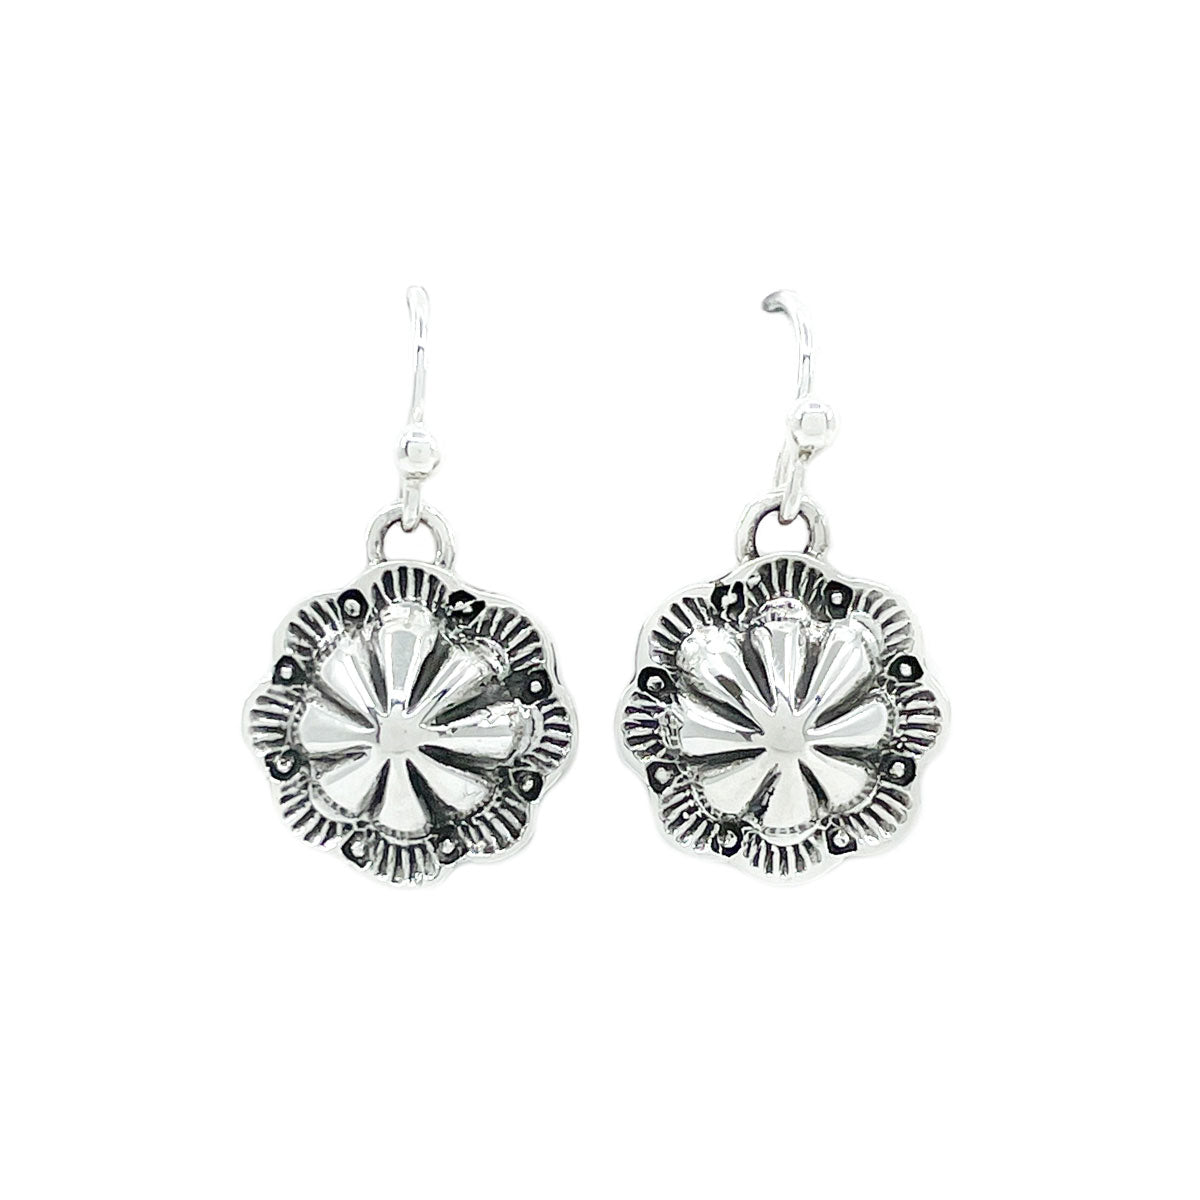 Sterling silver dangling concho blossom earrings by Diné silversmith Raymond Coriz Hand stamped with repousse work and sterling silver wires Measures .50 inches in diameter,  Dangles form ear lobe approx. 1 inch